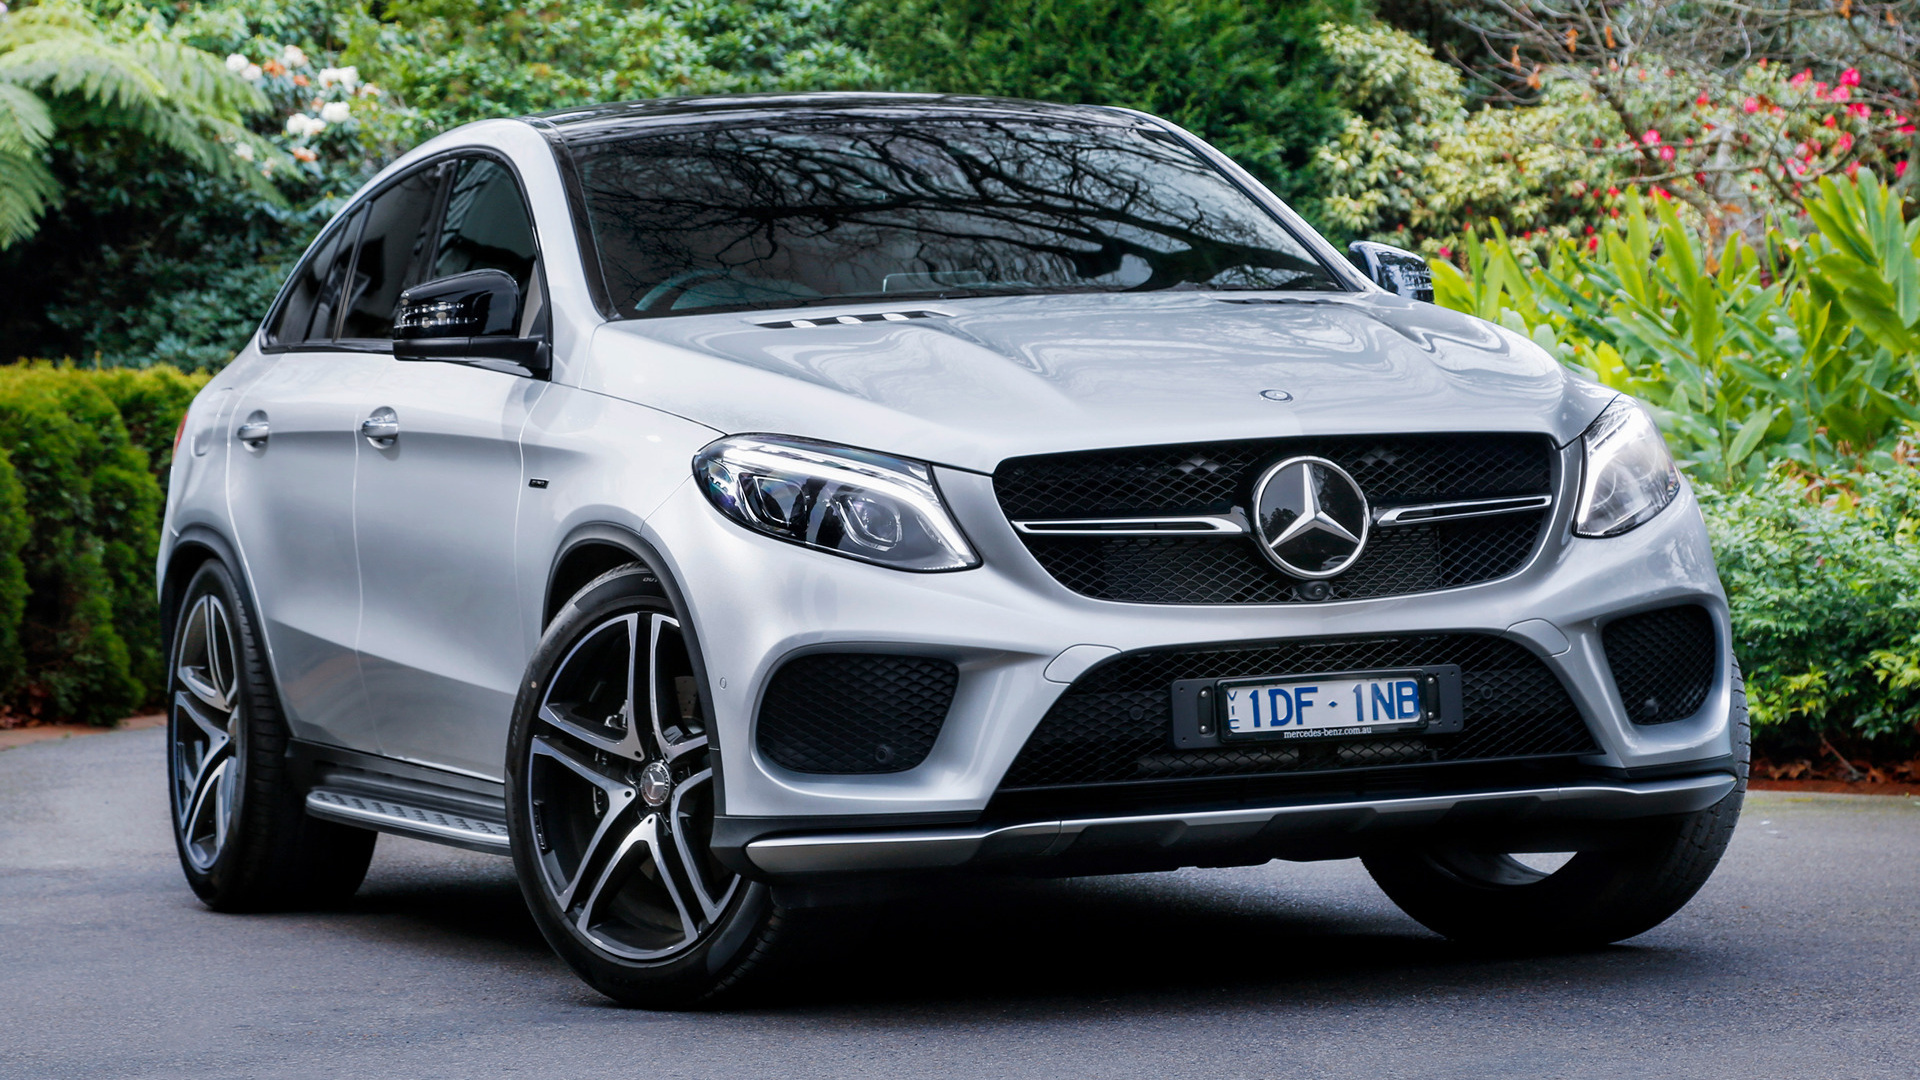 Mercedes-Benz GLE, Gle 450 AMG Coupe, 2015 model, HD wallpapers, 1920x1080 Full HD Desktop